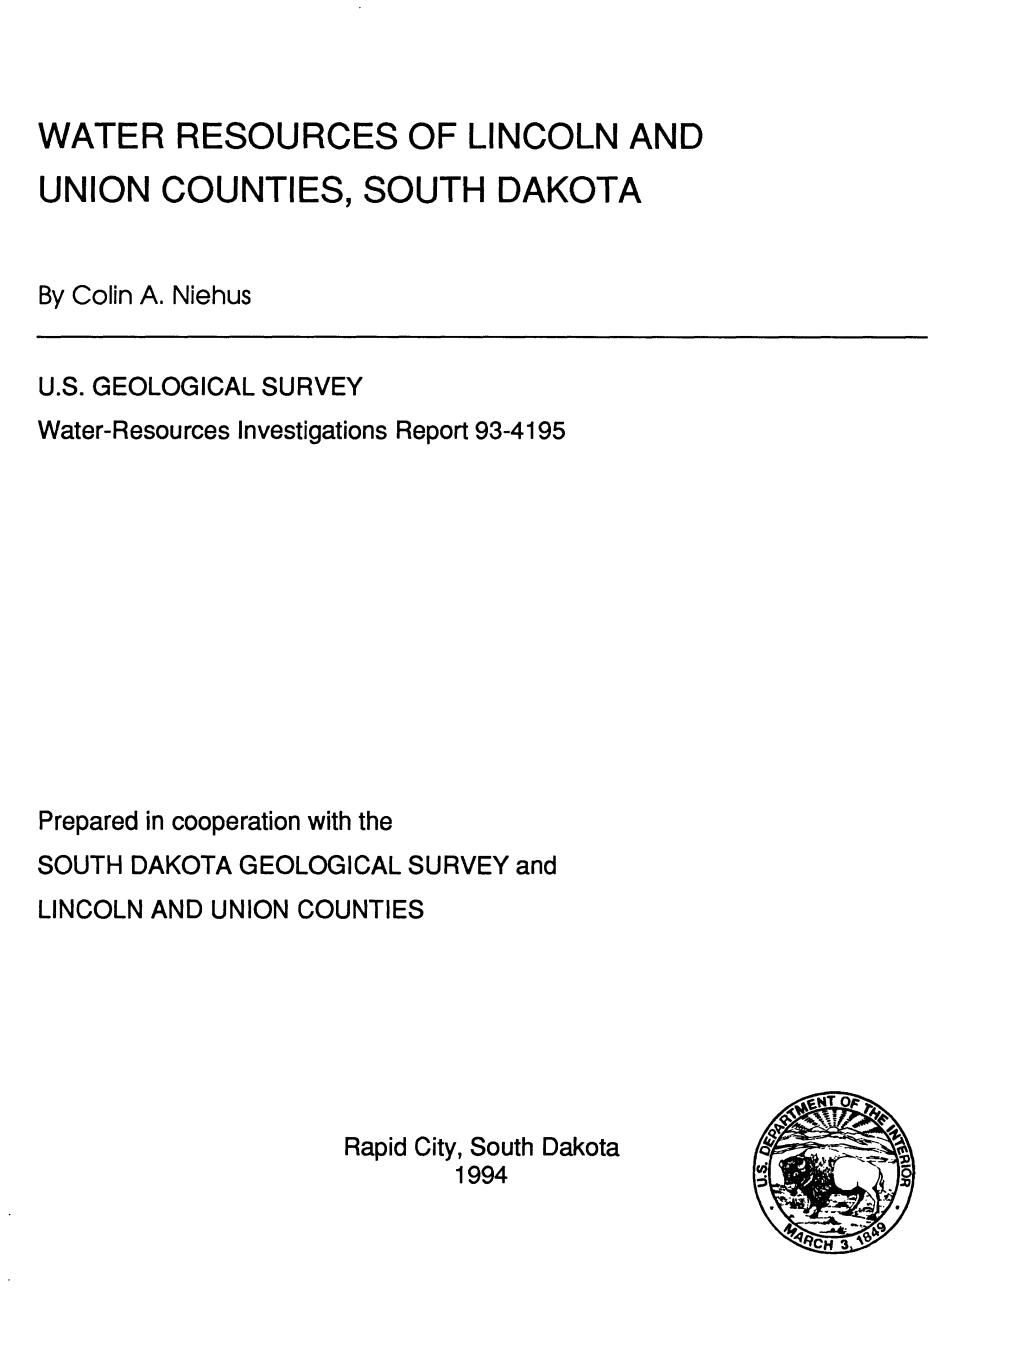 Water Resources of Lincoln and Union Counties, South Dakota